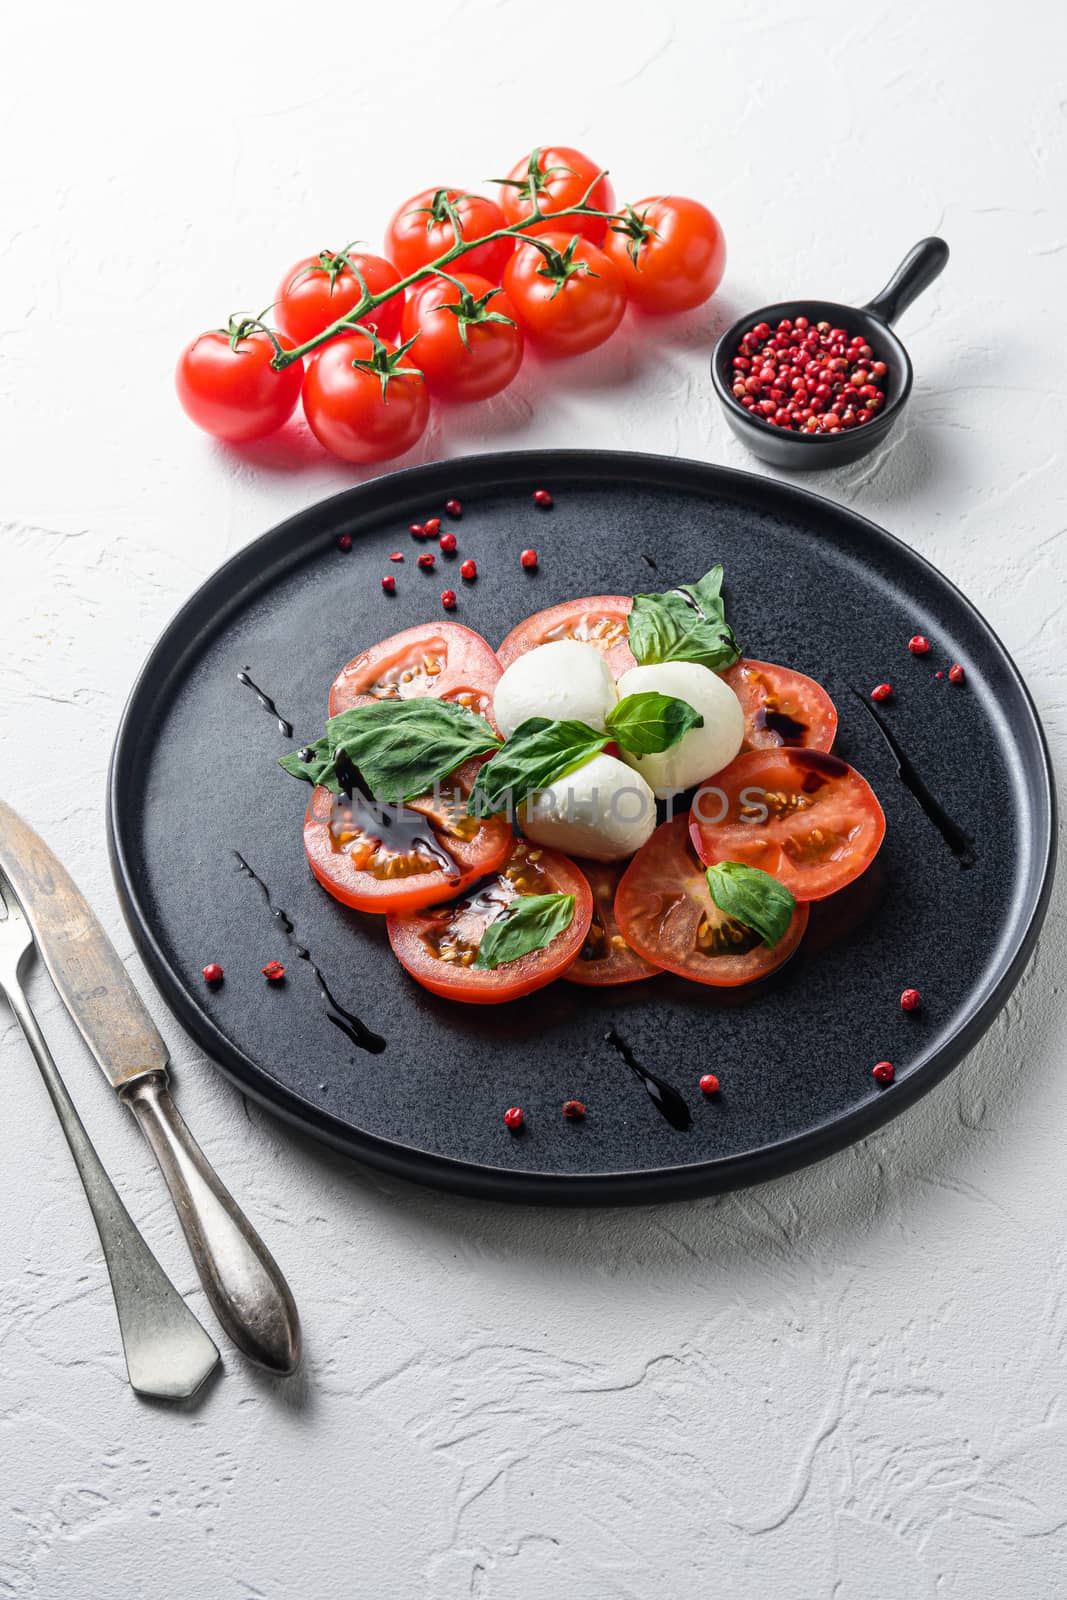 Caprese fresh italian salad with tomatoes, mozzarella, green basil on dark slate plate over white background close up selective focus vertical by Ilianesolenyi